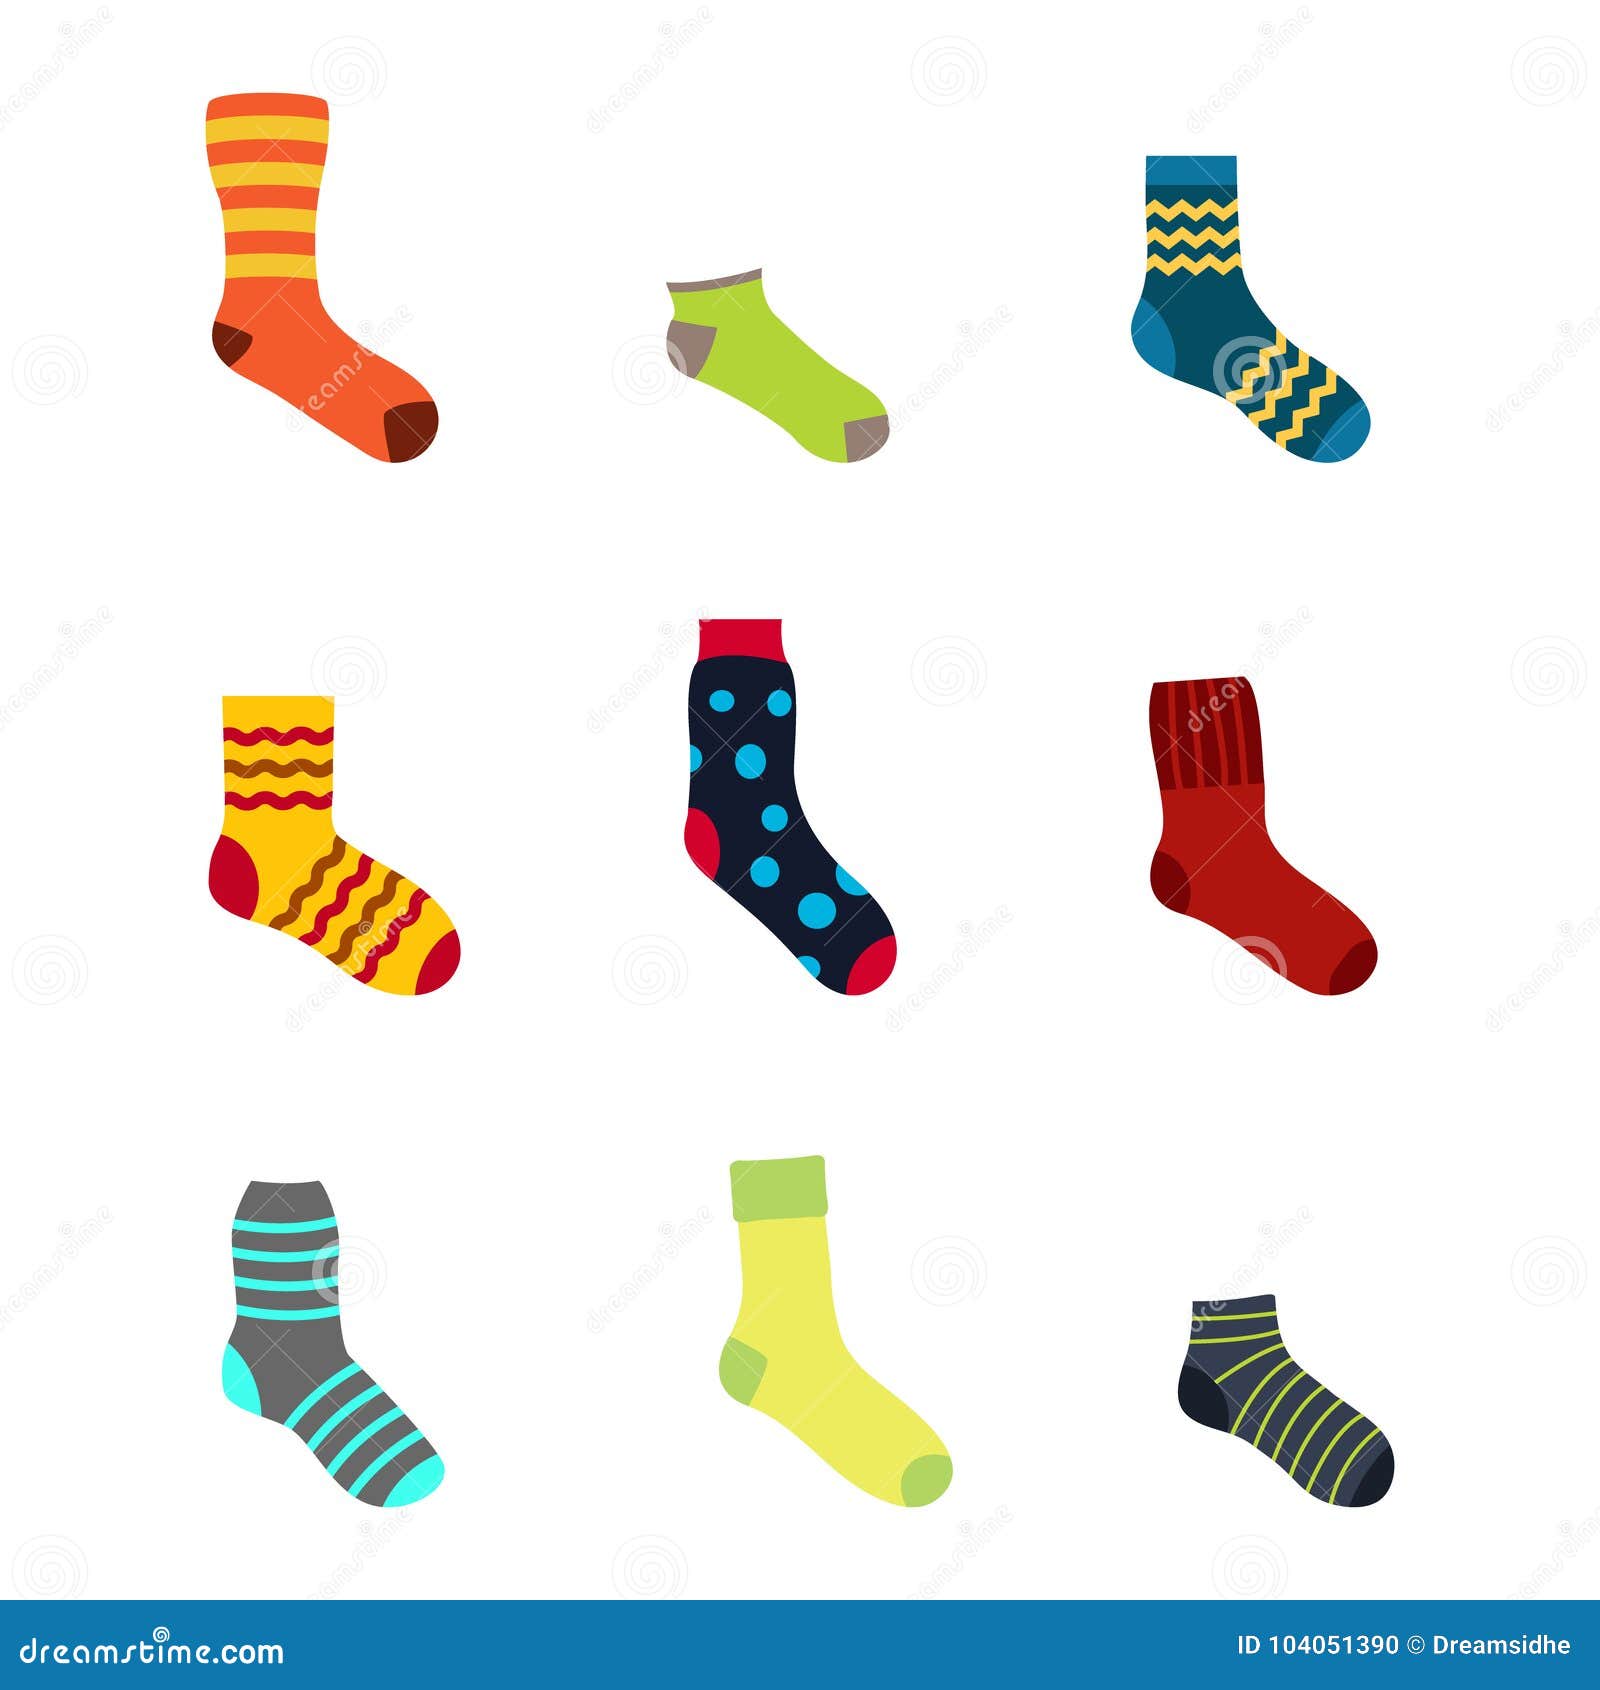 Color icons set with socks stock vector. Illustration of symbol - 104051390